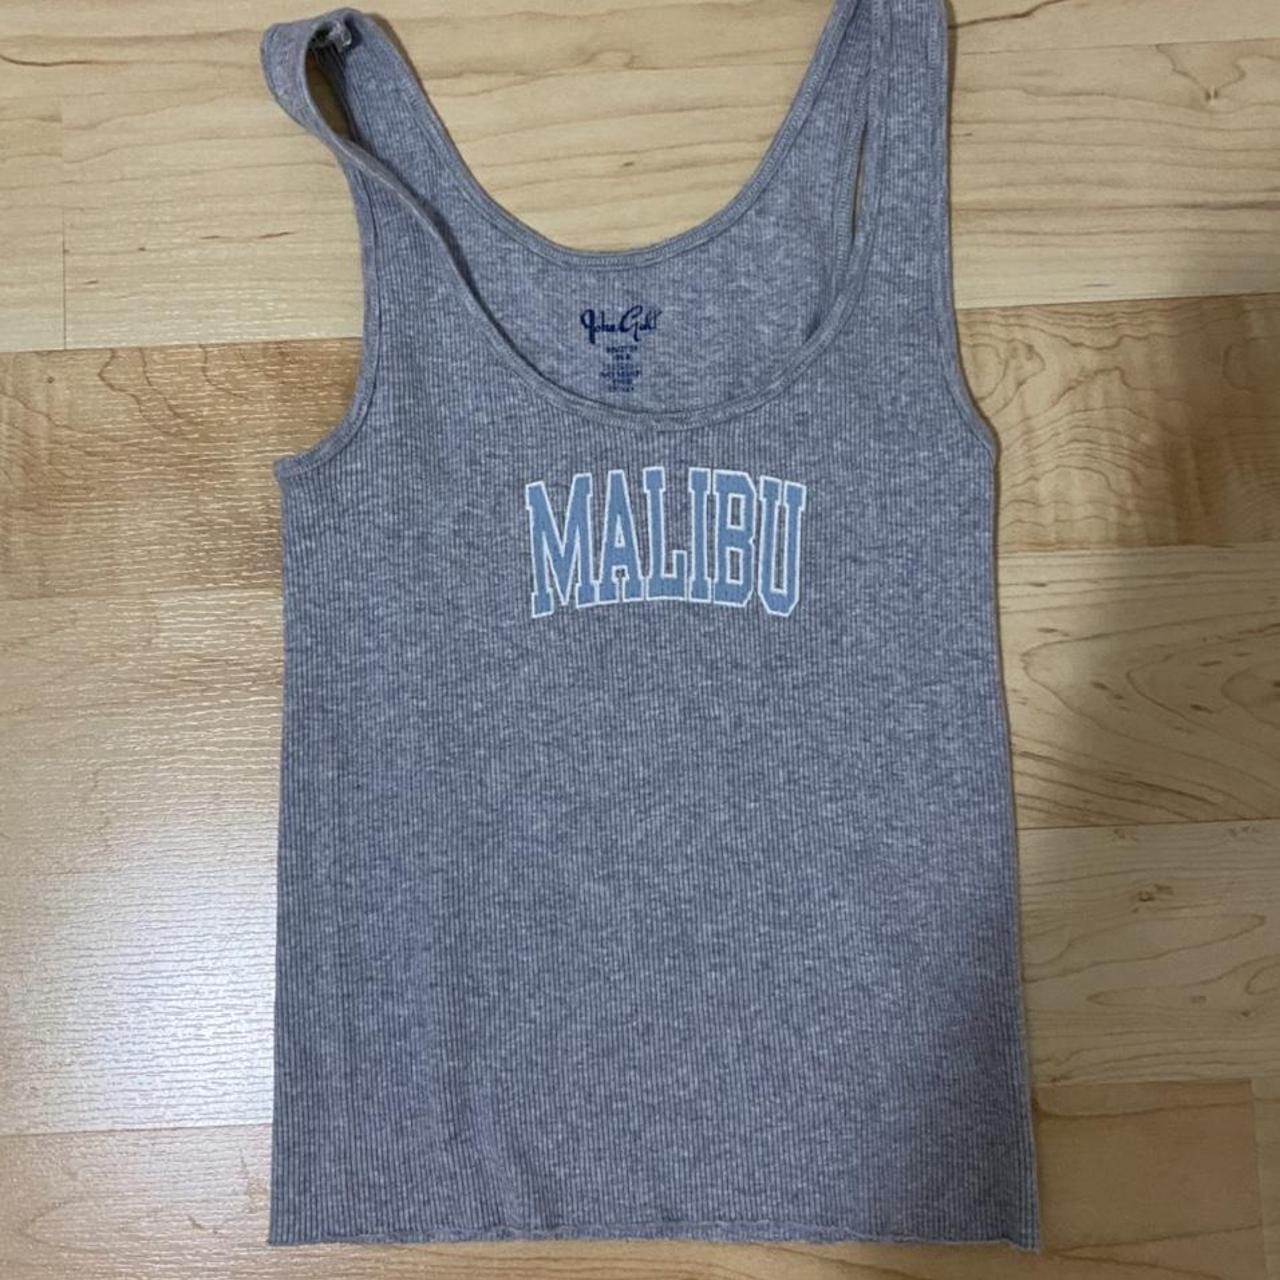 Brandy Melville Sheena Tank Top Gray - $15 New With Tags - From Seven